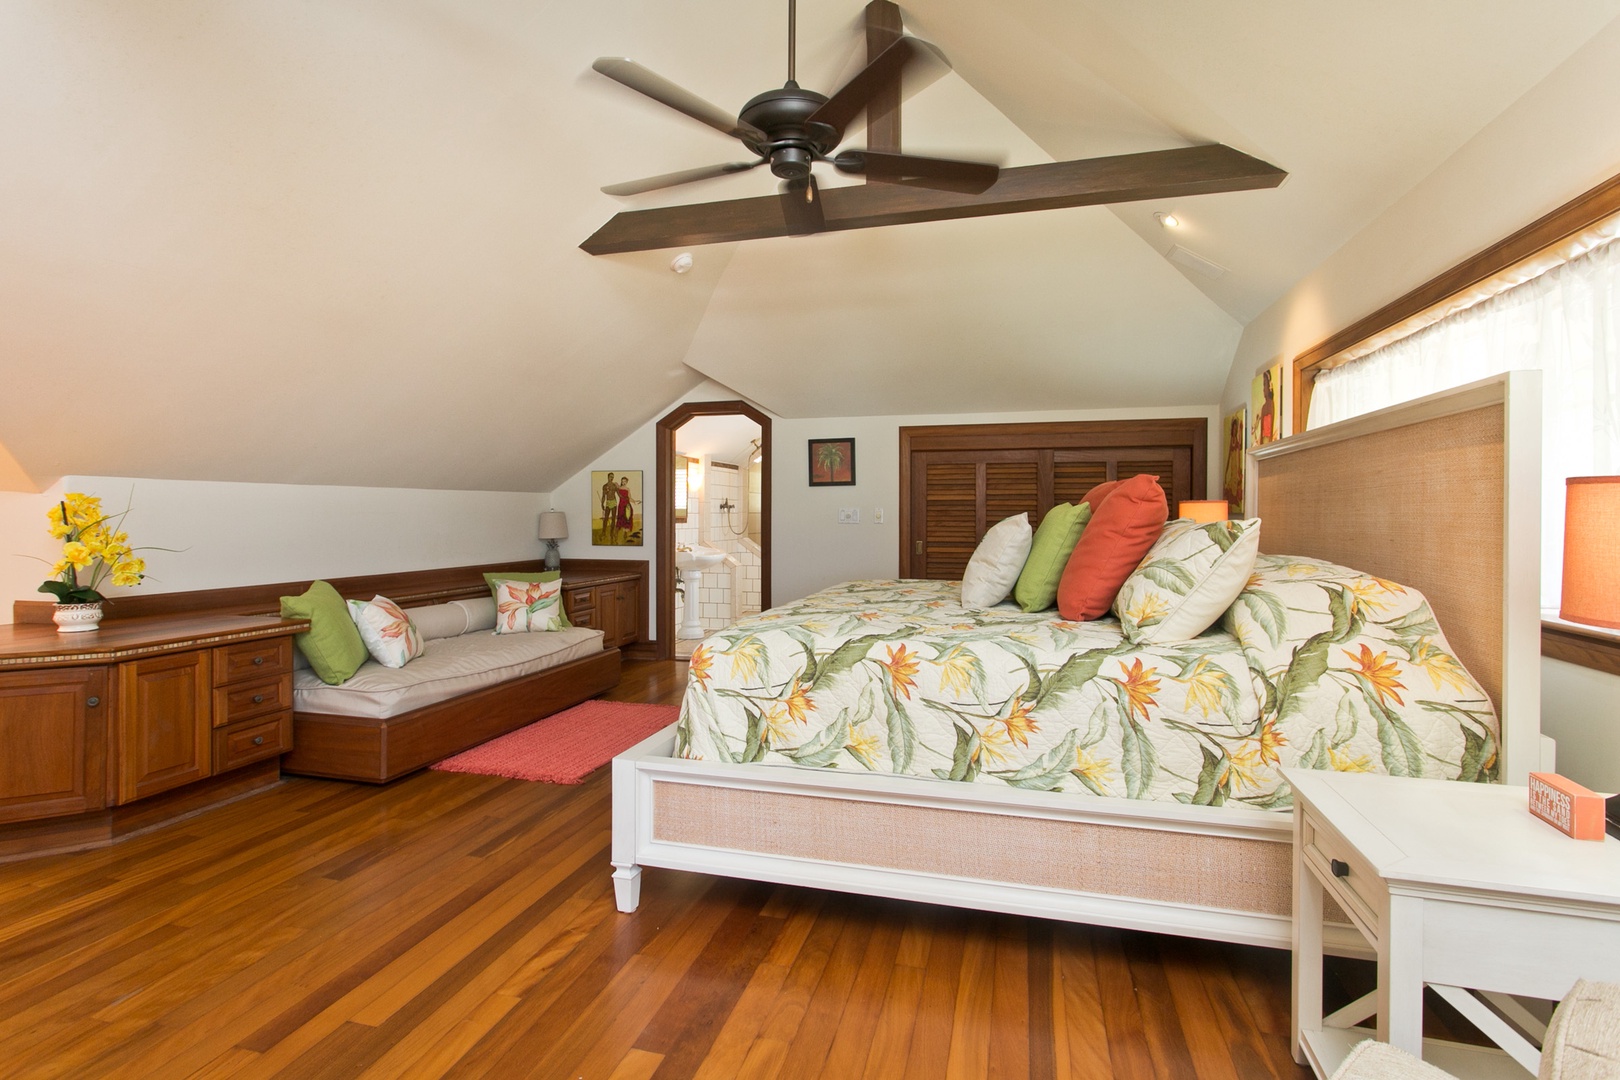 Kailua Vacation Rentals, Hale Melia* - Guest bedroom with a king bed and a sleeper sofa